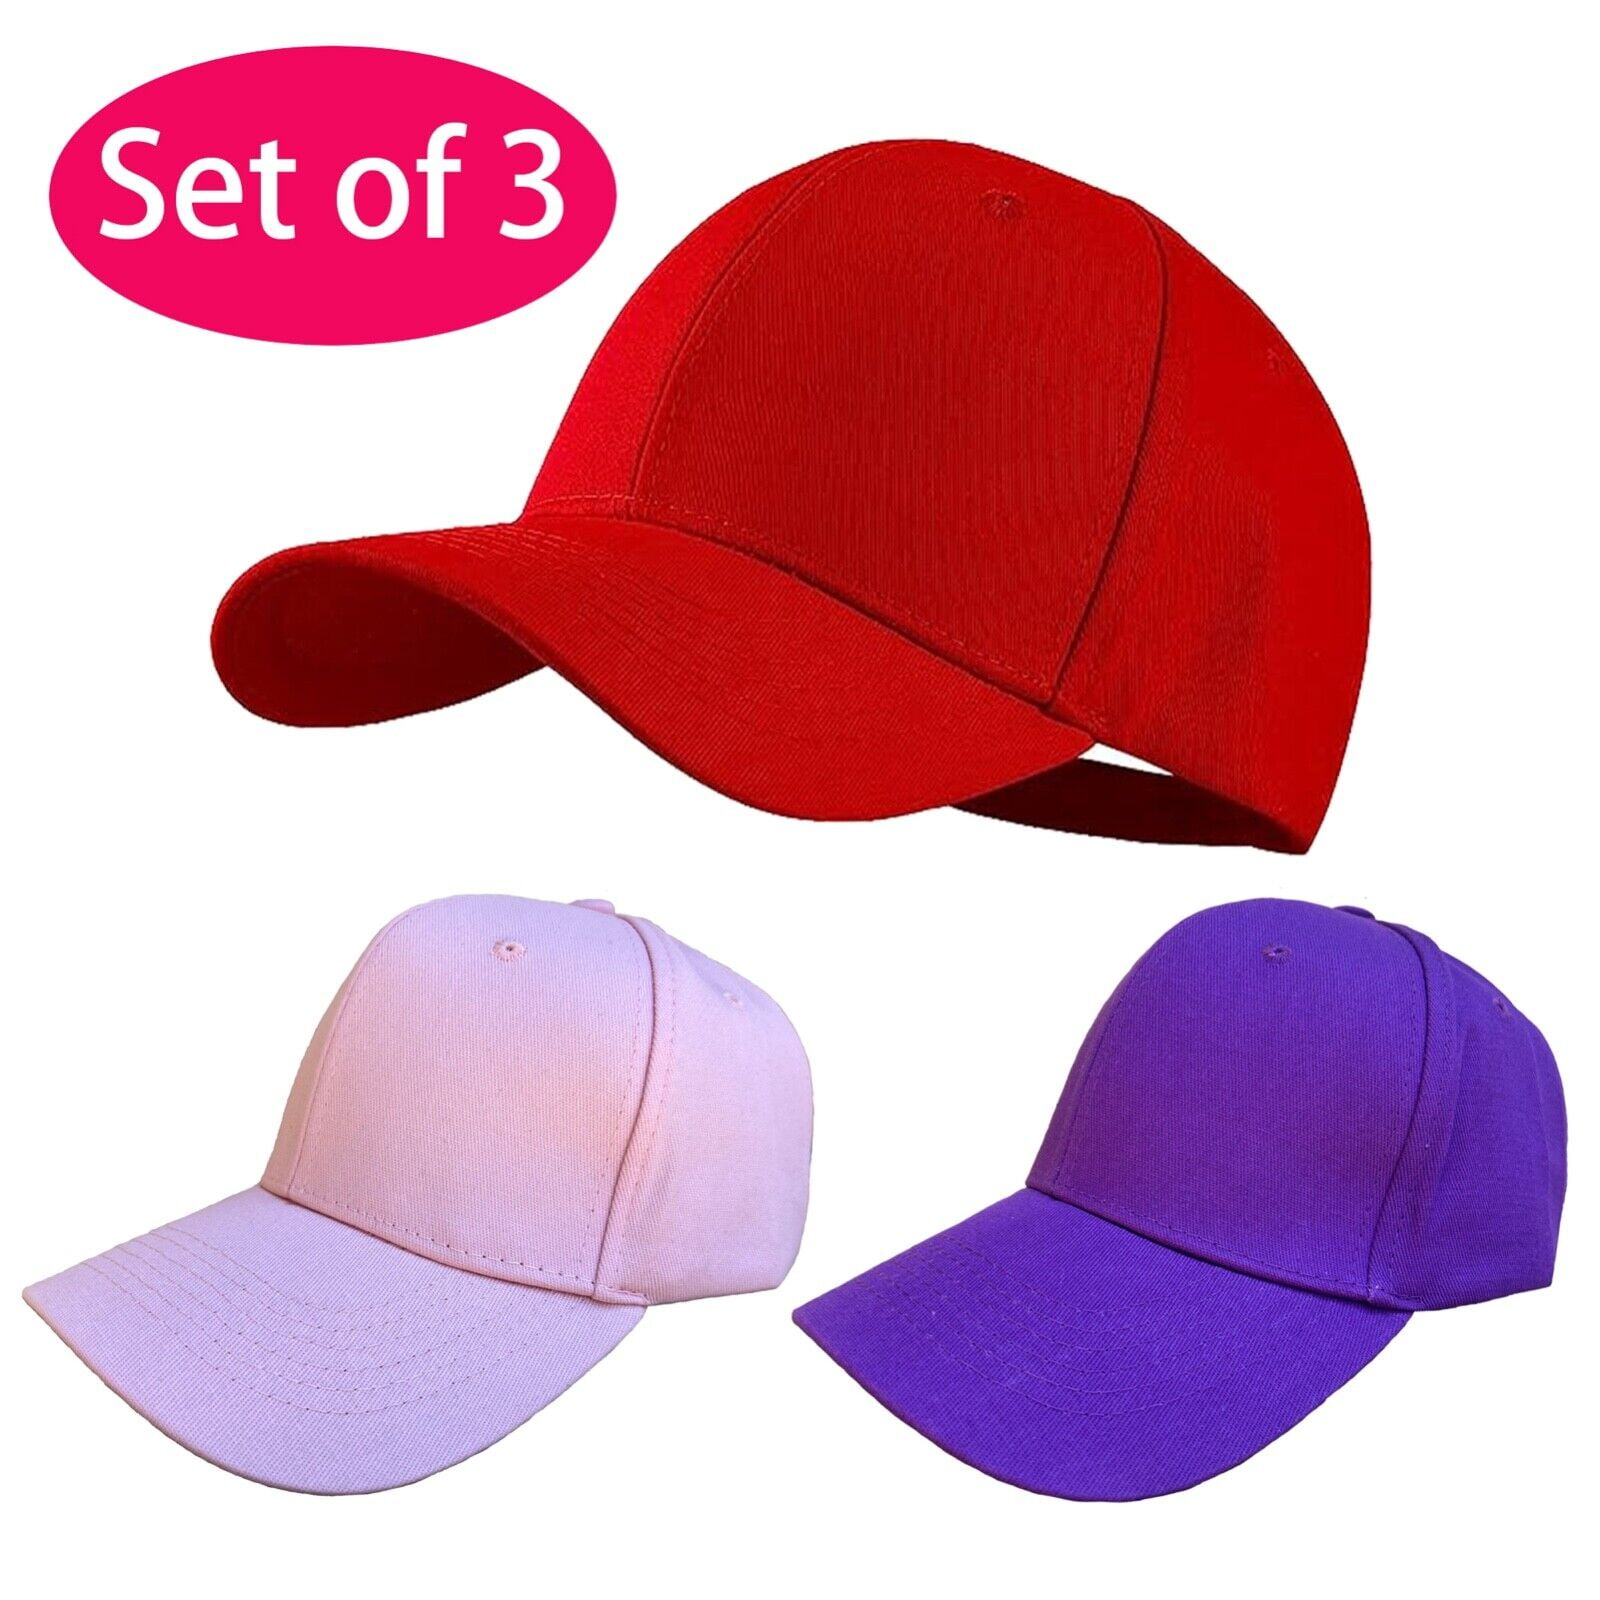 Women Baseball Solid 3, Flex Plain of One Structured Set Cap, 100% Fit Size Cotton Adjustable Polo-Style Hat Hats